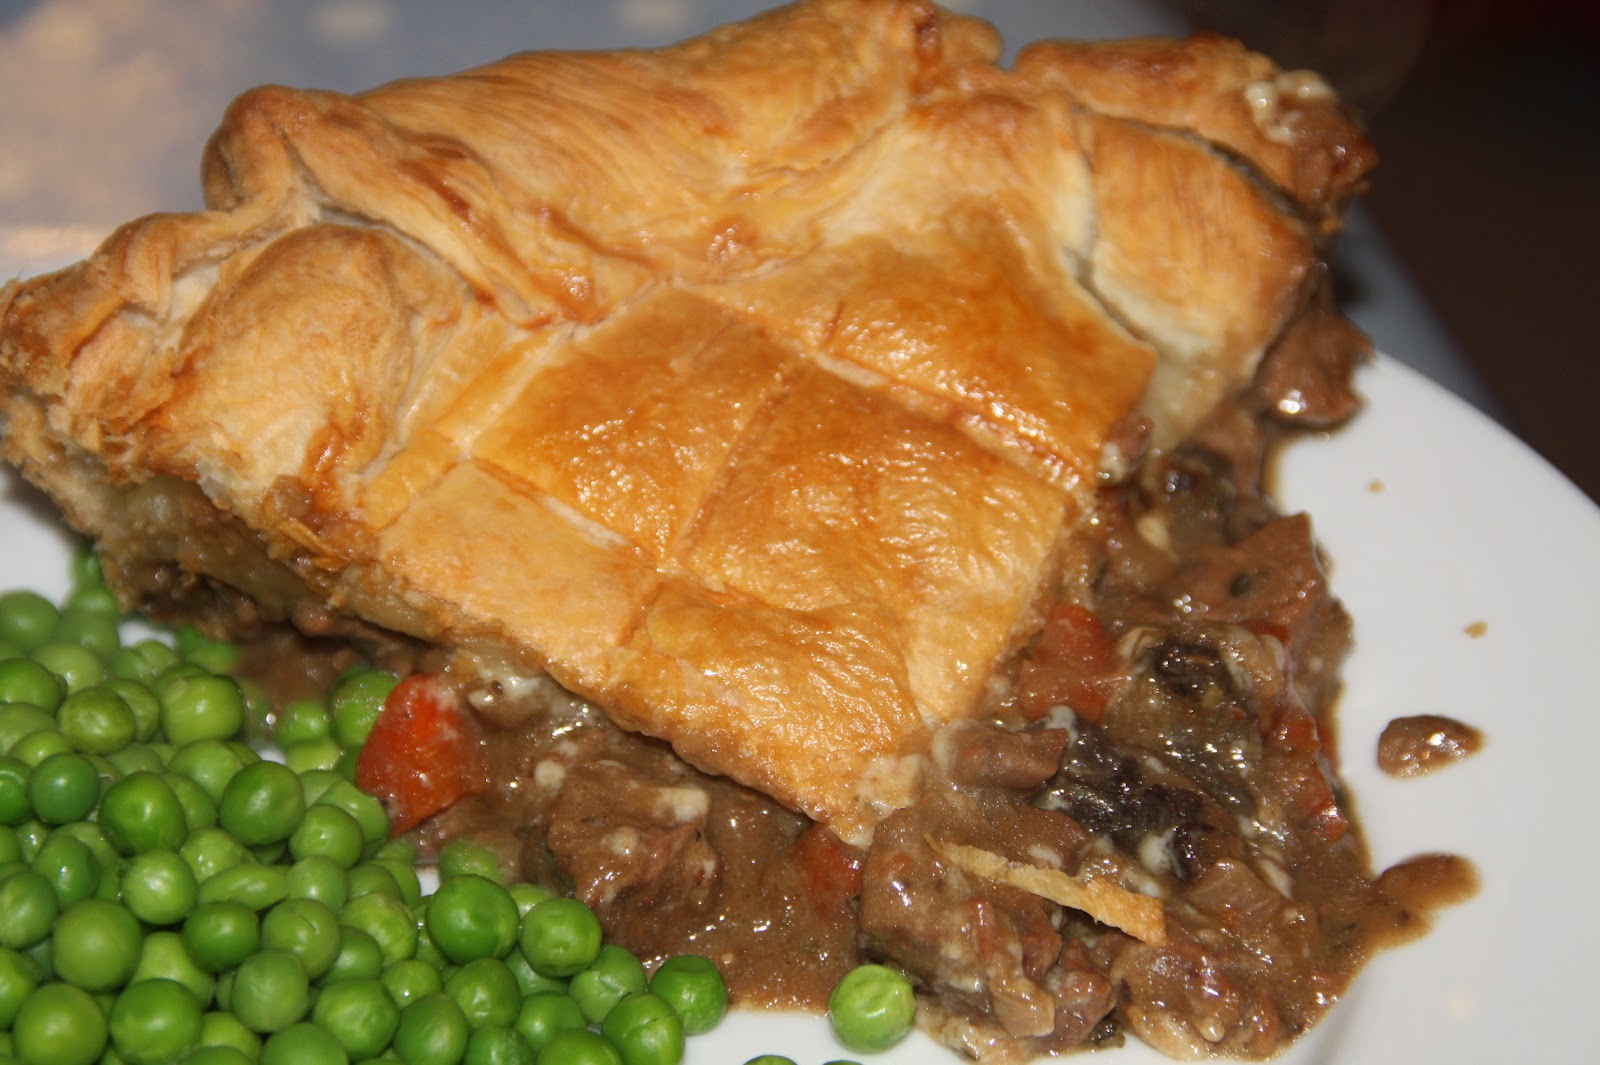 At Home with Mrs M!: Jamie O's Steak, Guinness and Cheese Pie